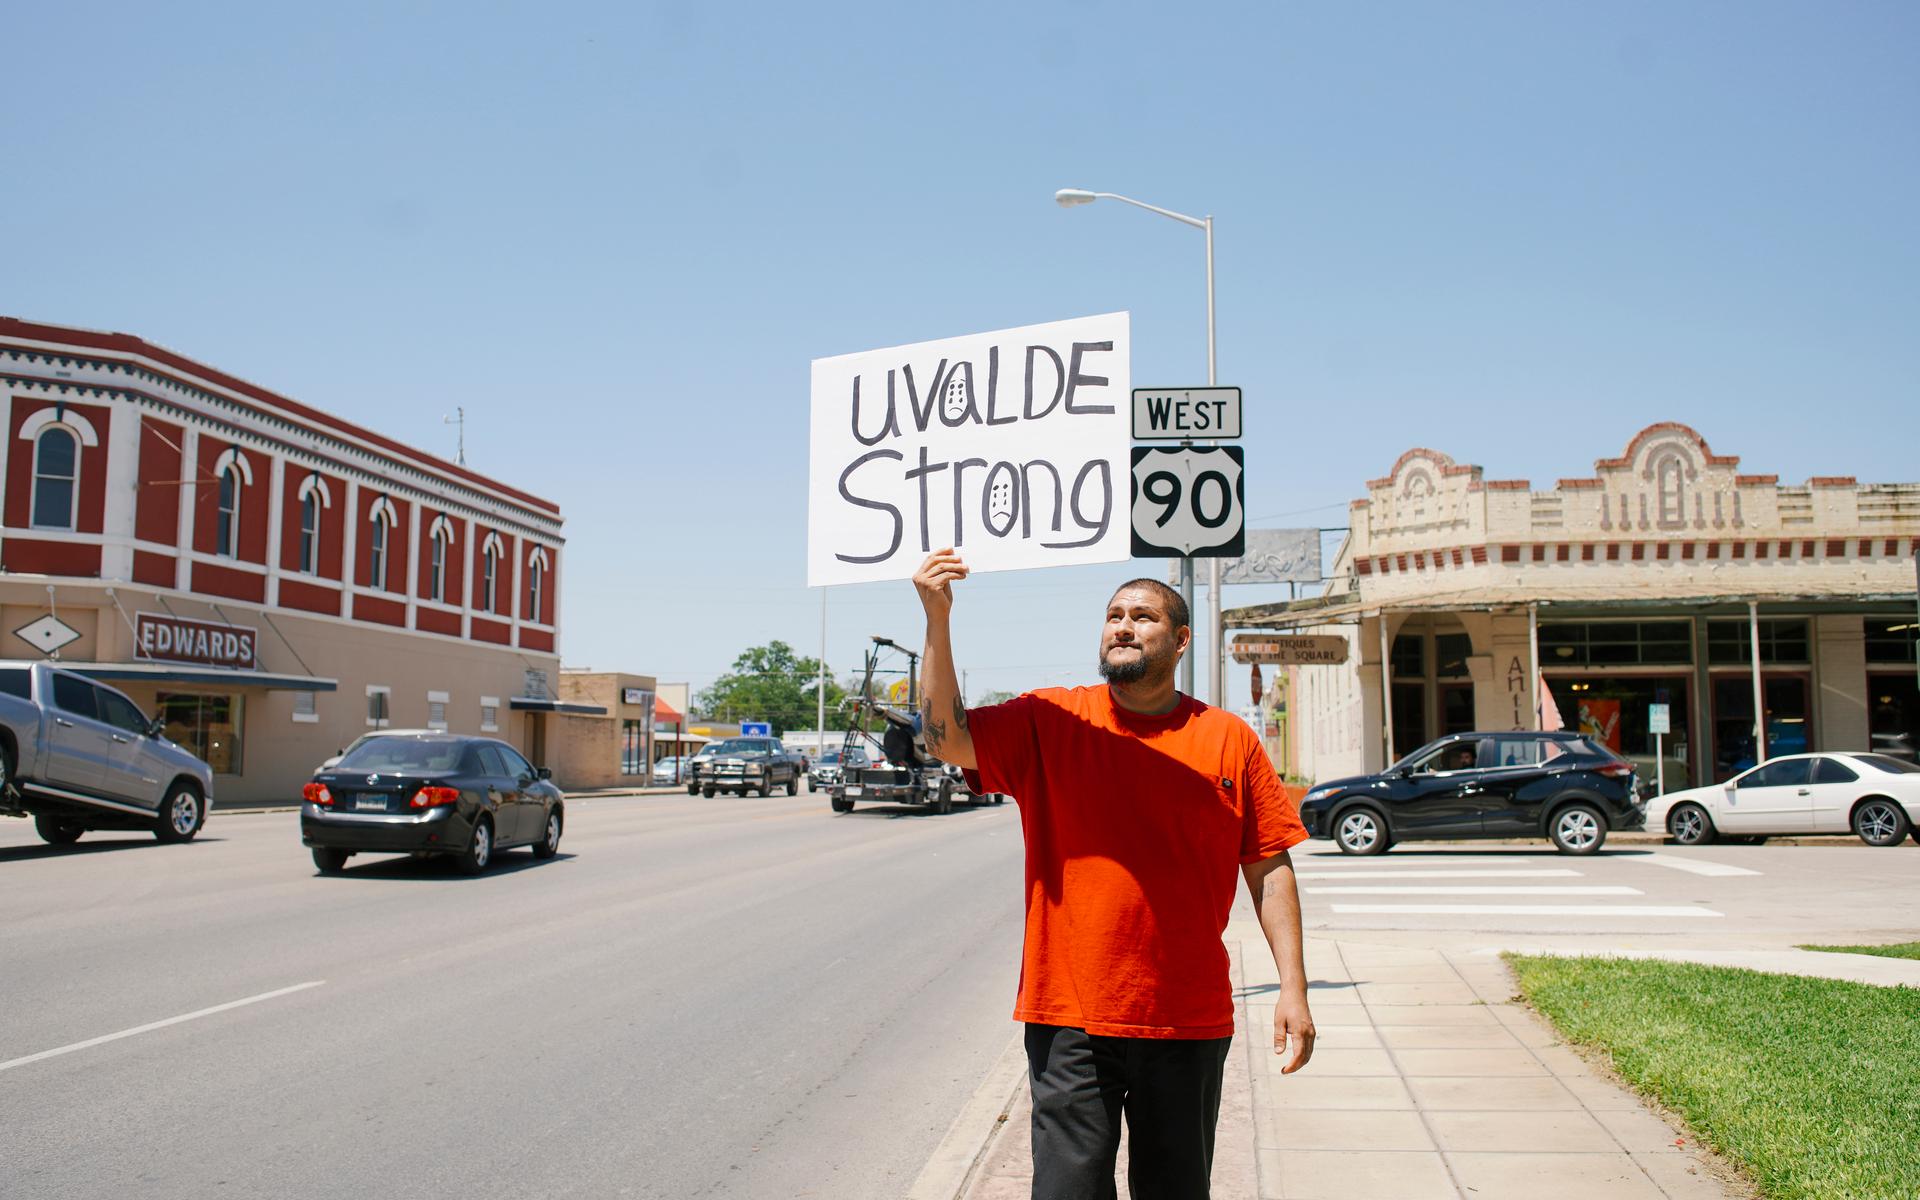 Alex Covarrubias holds a sign reading “Uvalde Strong” and walks in front of  a memorial for the children killed in a mass shooting at Robb Elementary school in Uvalde, TX., May 26, 2022. (Photo/Katie McTIernan)